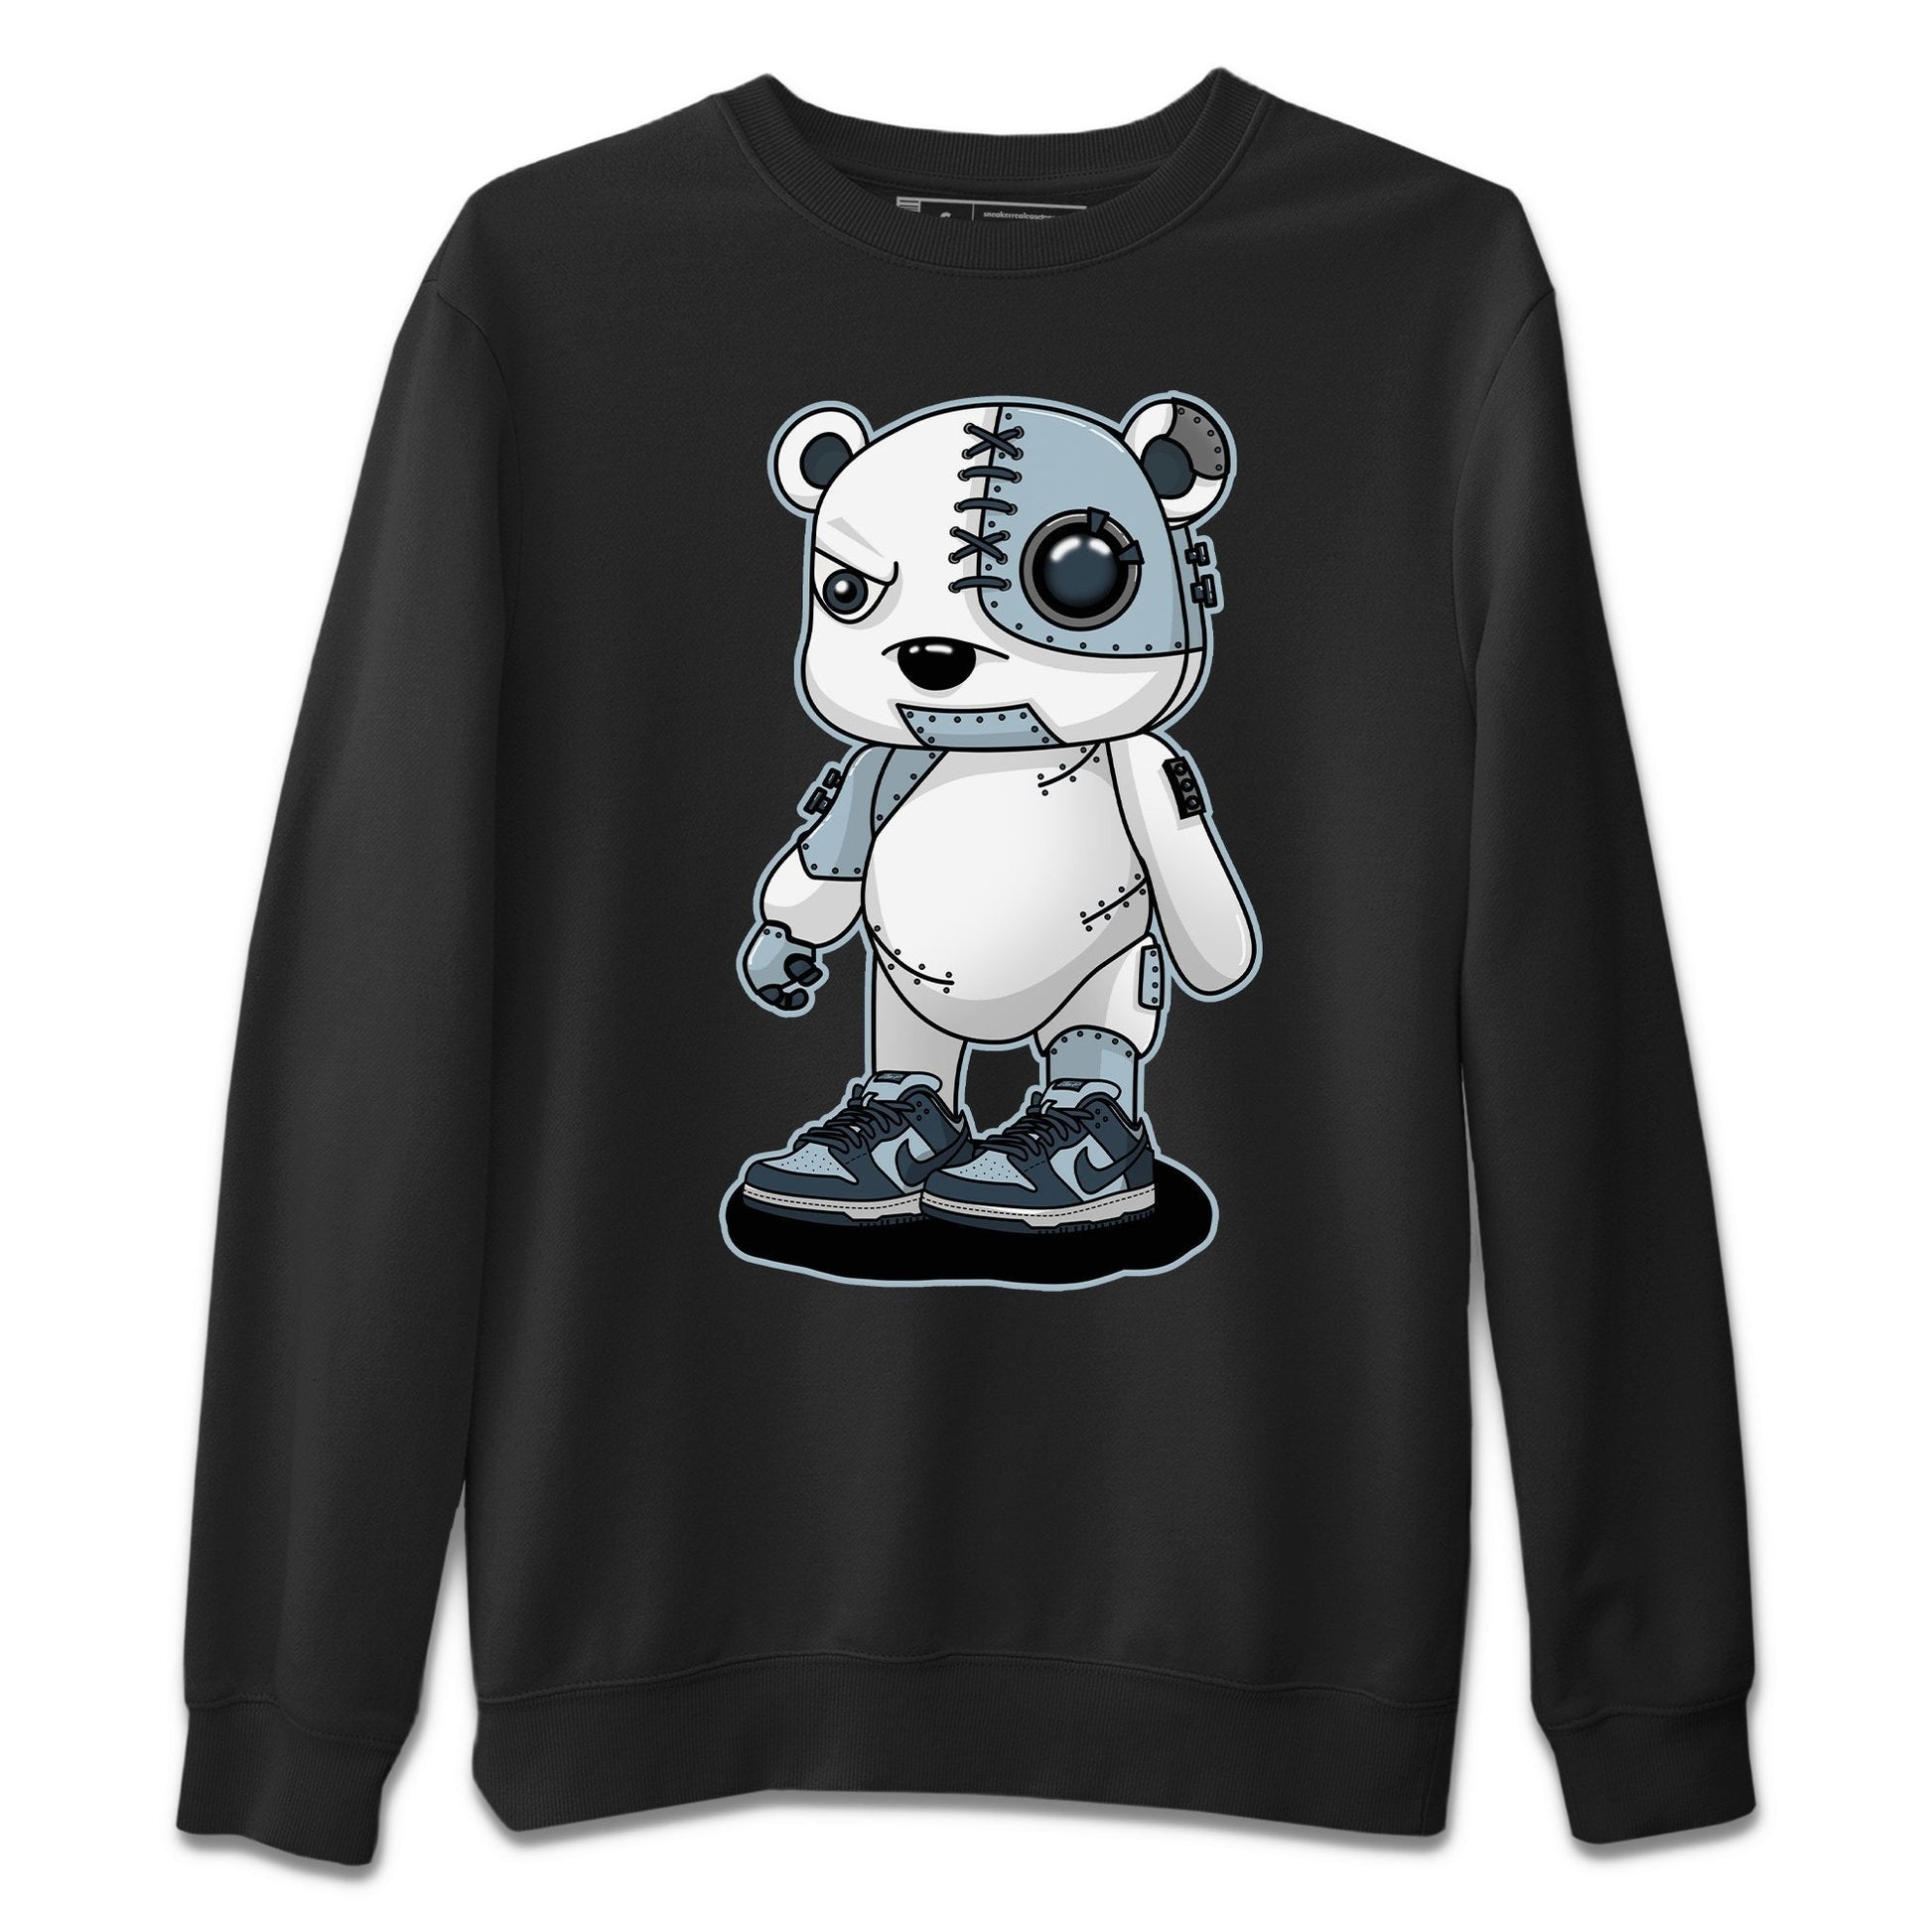 Dunk Championship Grey Sneaker Match Tees Cyborg Bear Sneaker Tees Dunk Championship Grey SNRT Sneaker Tees Casual Short Sleeve Unisex Sneaker T-Shirts